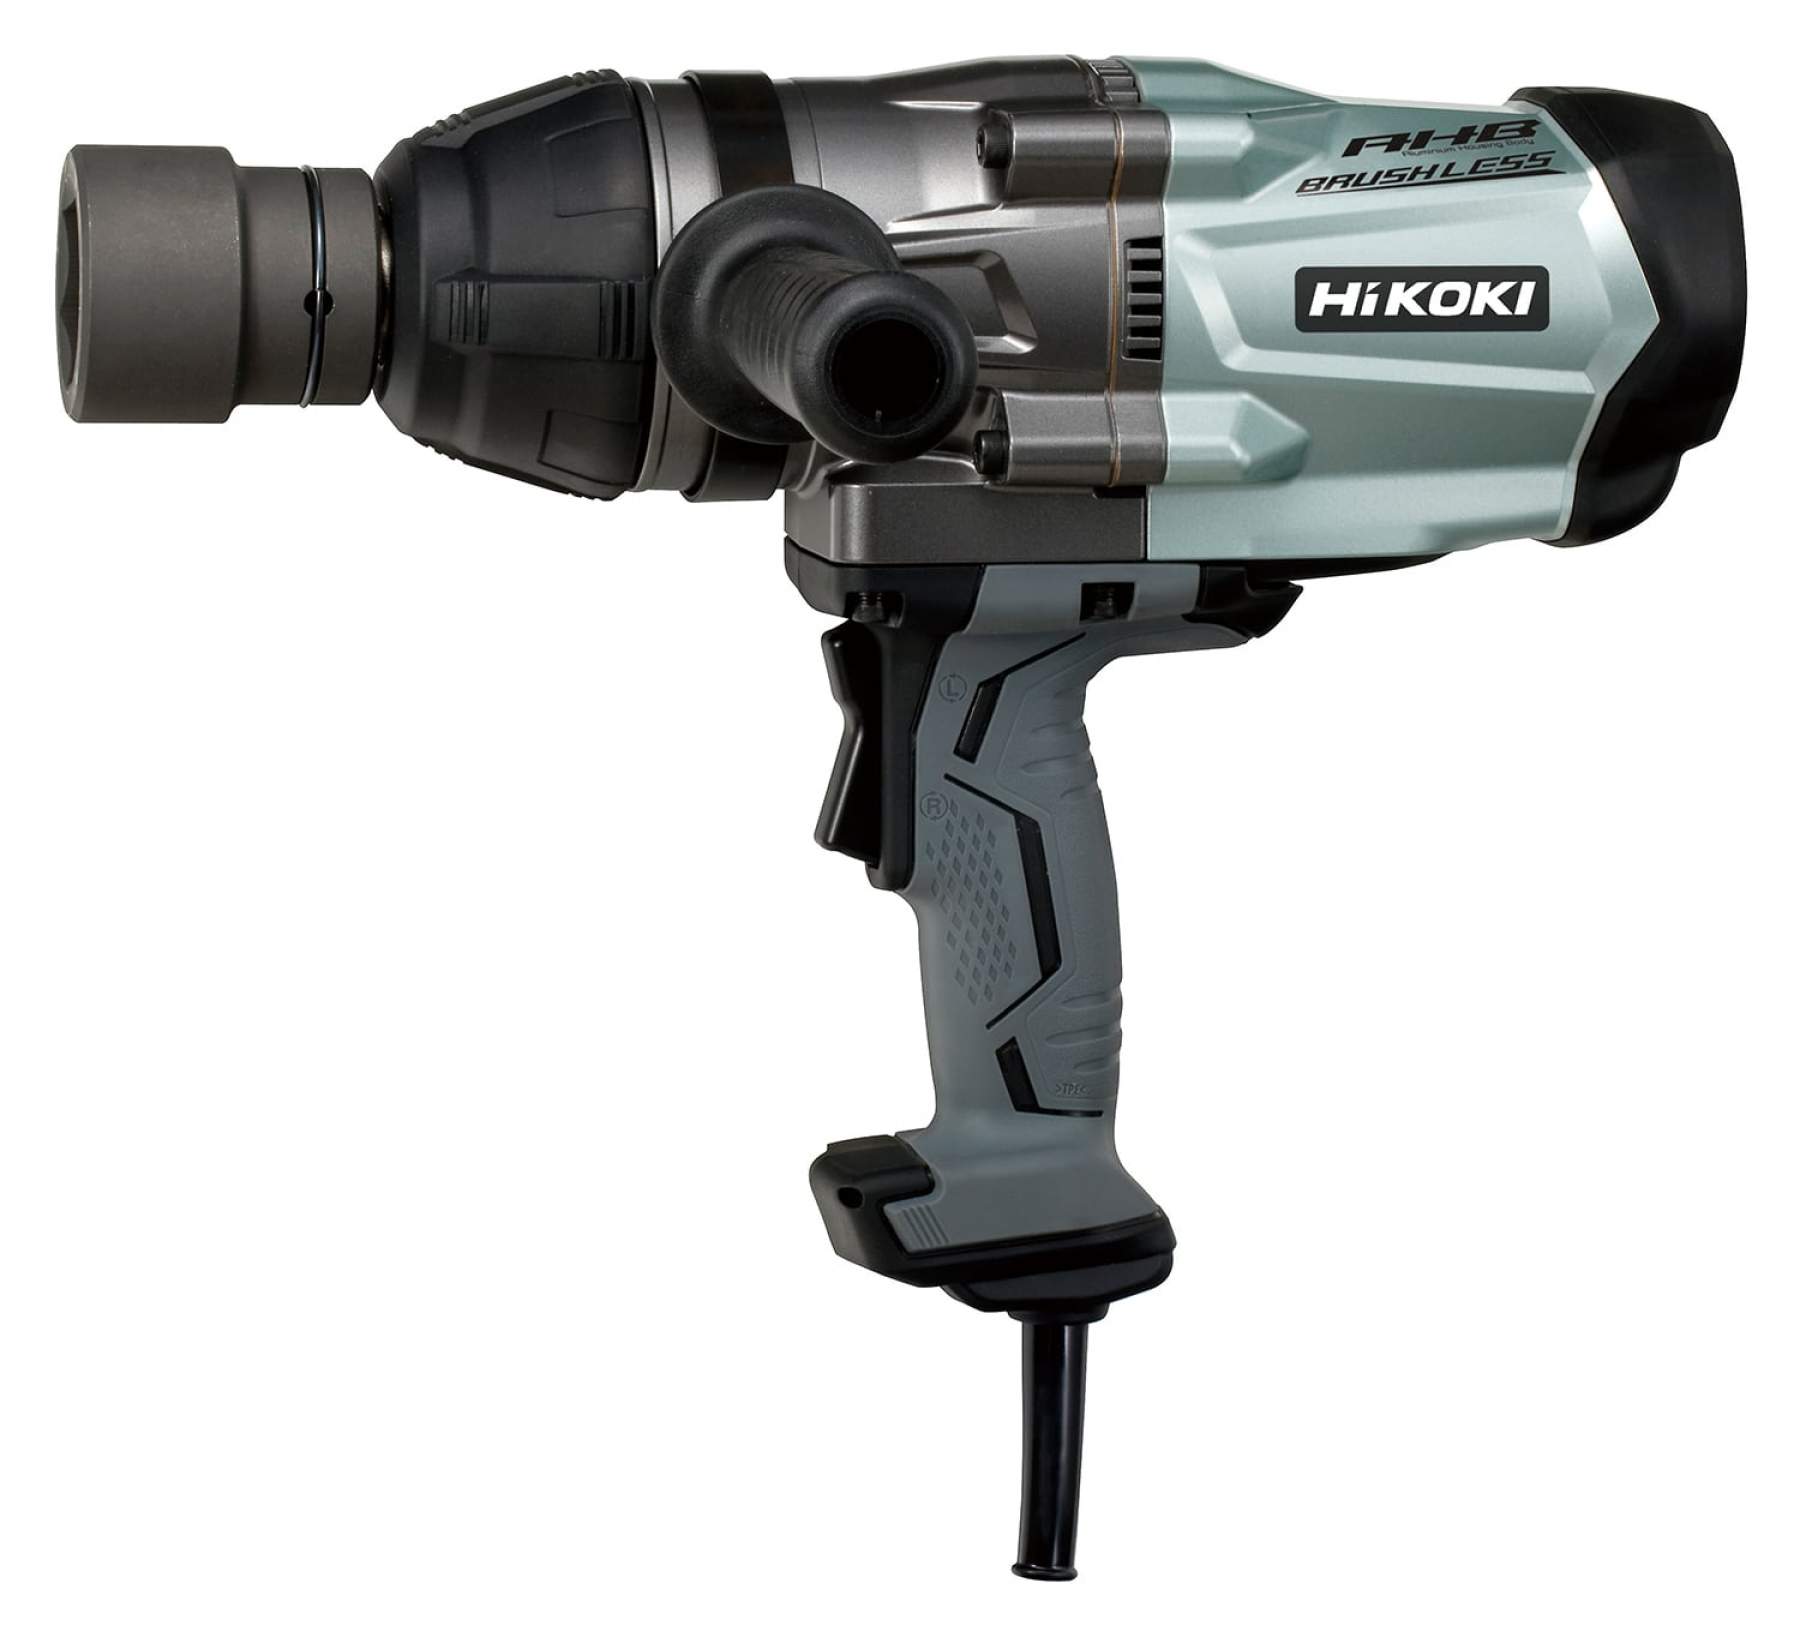 25mm Impact Wrench with Brushless Motor